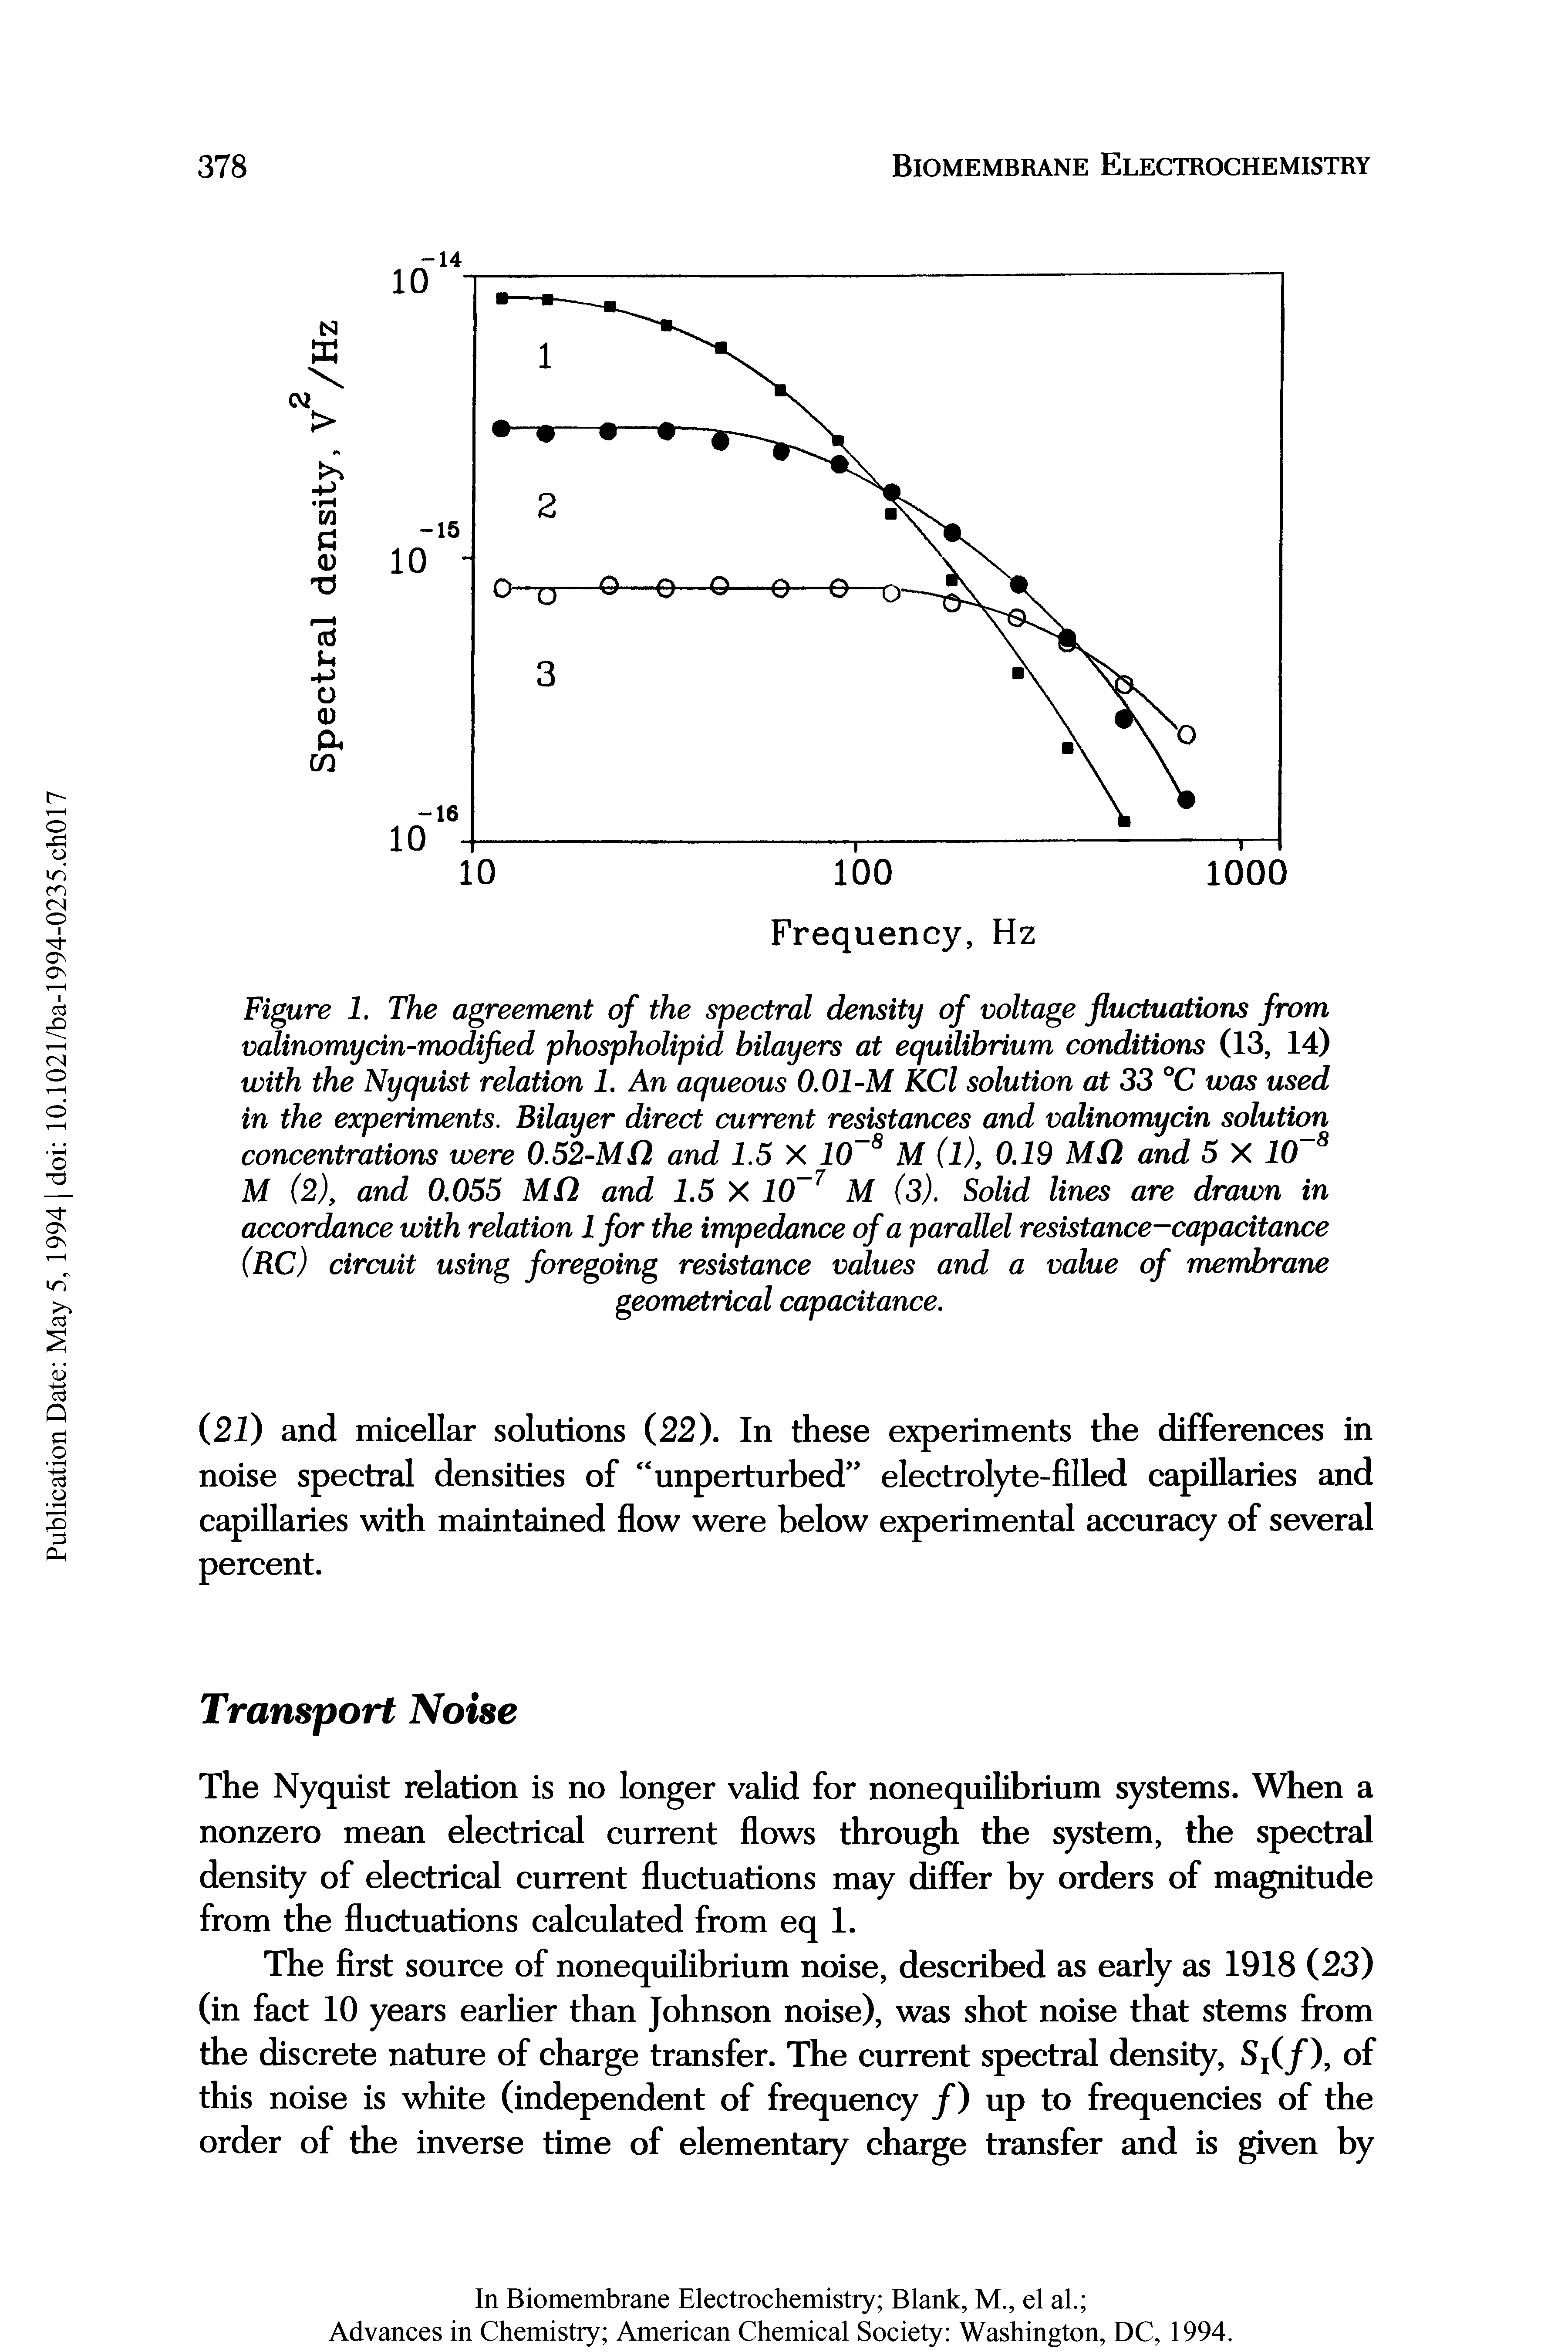 Figure 1. The agreement of the spectral density of voltage fluctuations from valinomycin-modified phospholipid bilayers at equilibrium conditions (13, 14) with the Nyquist relation 1. An aqueous 0.01-M KCl solution at 33 °C was used in the experiments. Bilayer direct current resistances and valinomycin solution concentrations were 0.52-Mfl and 1.5 X 10 8 M (l), 0.19 Mfl and 5 X 10 8 M (2), and 0.055 Mi2 and 1.5 X 10 7 M (3). Solid lines are drawn in accordance with relation 1 for the impedance of a parallel resistance-capacitance (RC) circuit using foregoing resistance values and a value of membrane geometrical capacitance.